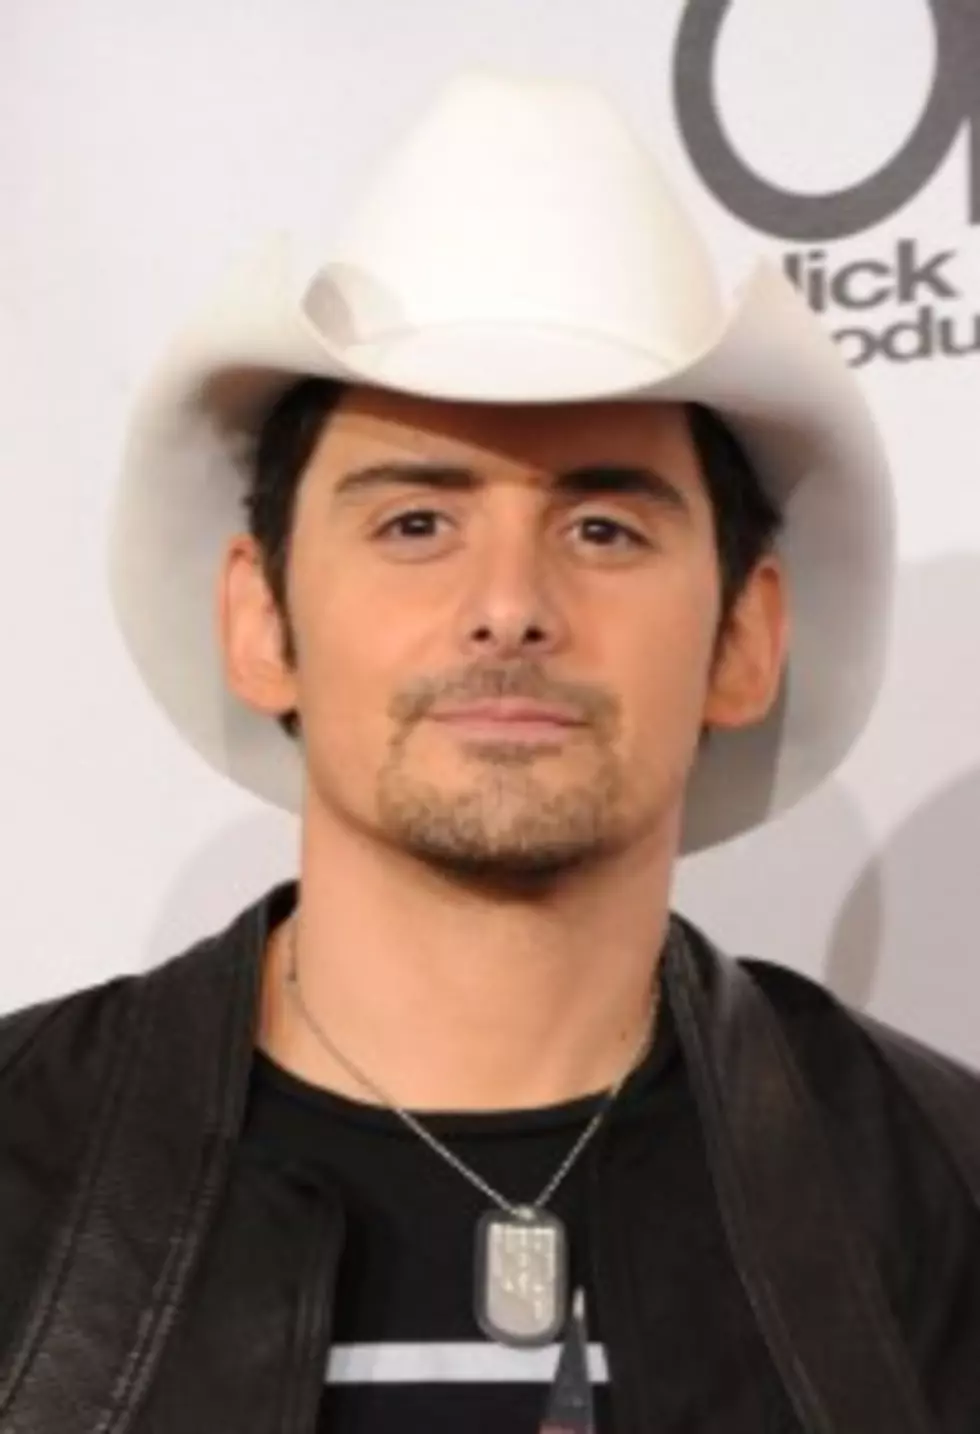 Brad Paisley, Faith Hill and Anna Nicole Smith &#8211; Today In Country Music History